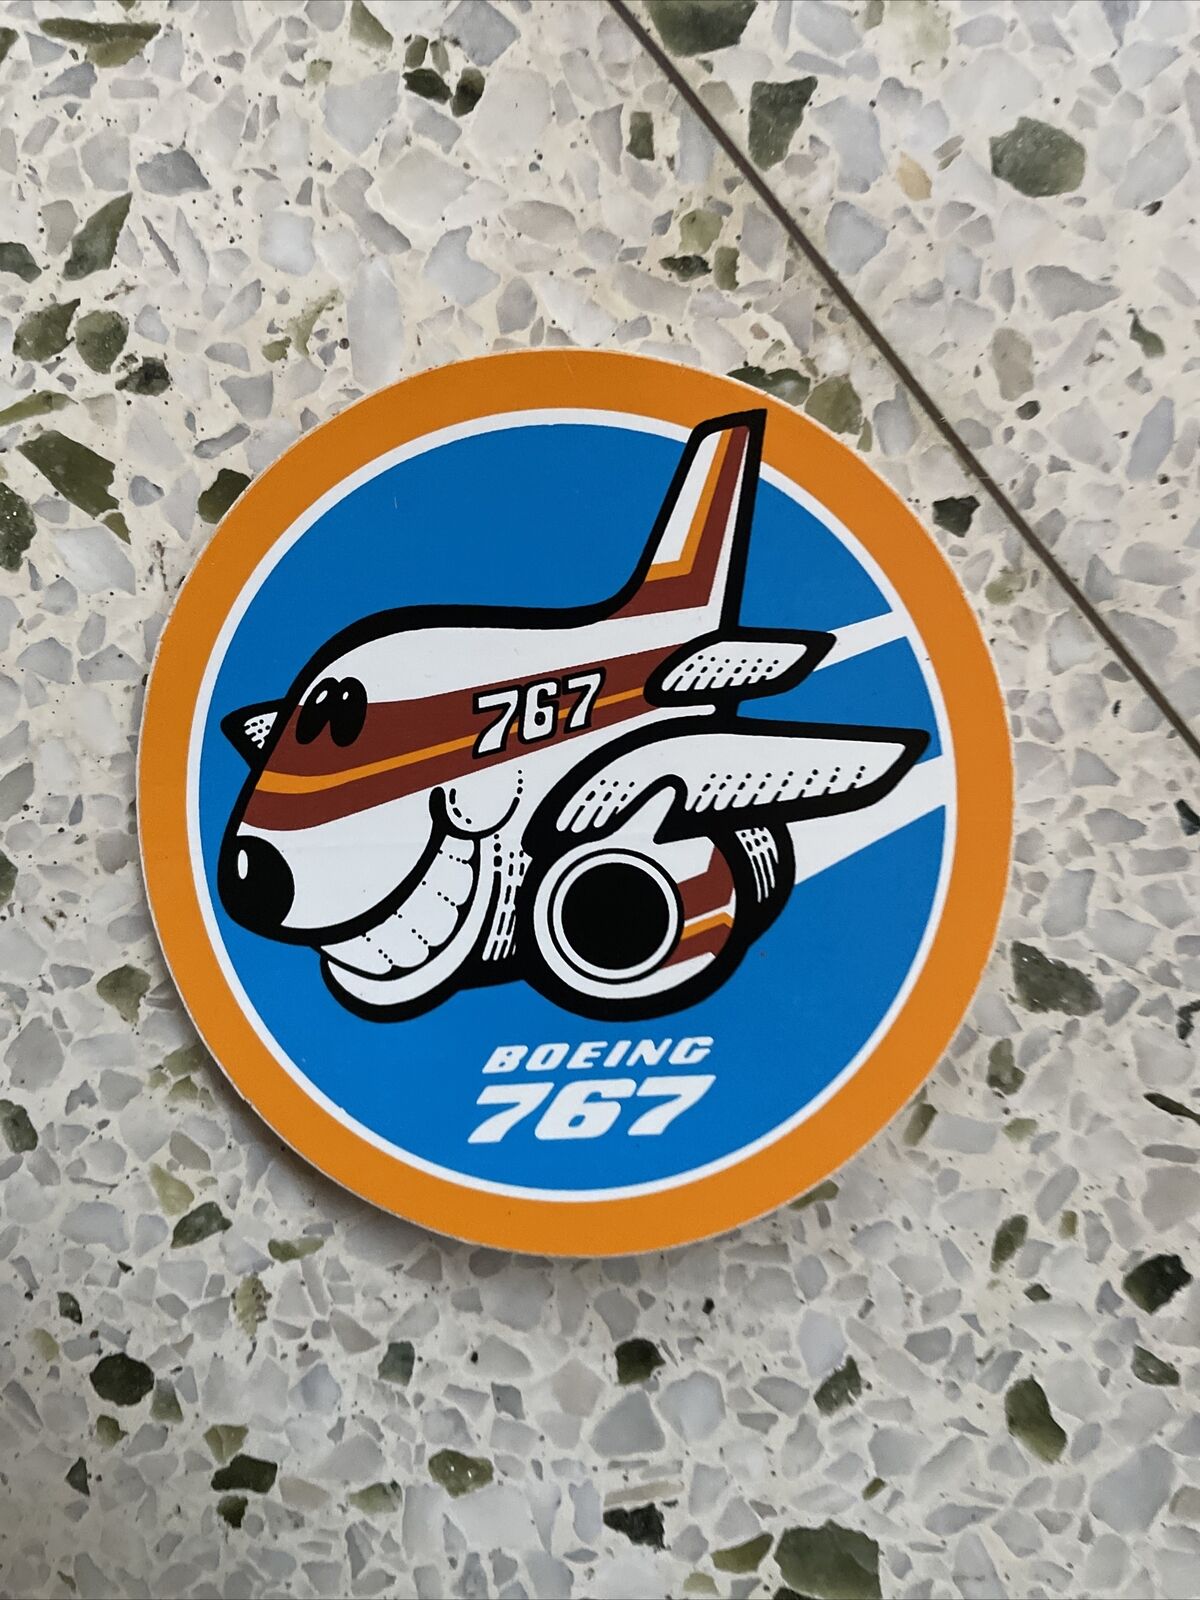 1982 Farnborough Airshow Boeing Company 767 Aircraft Jet Airliner Sticker Decal